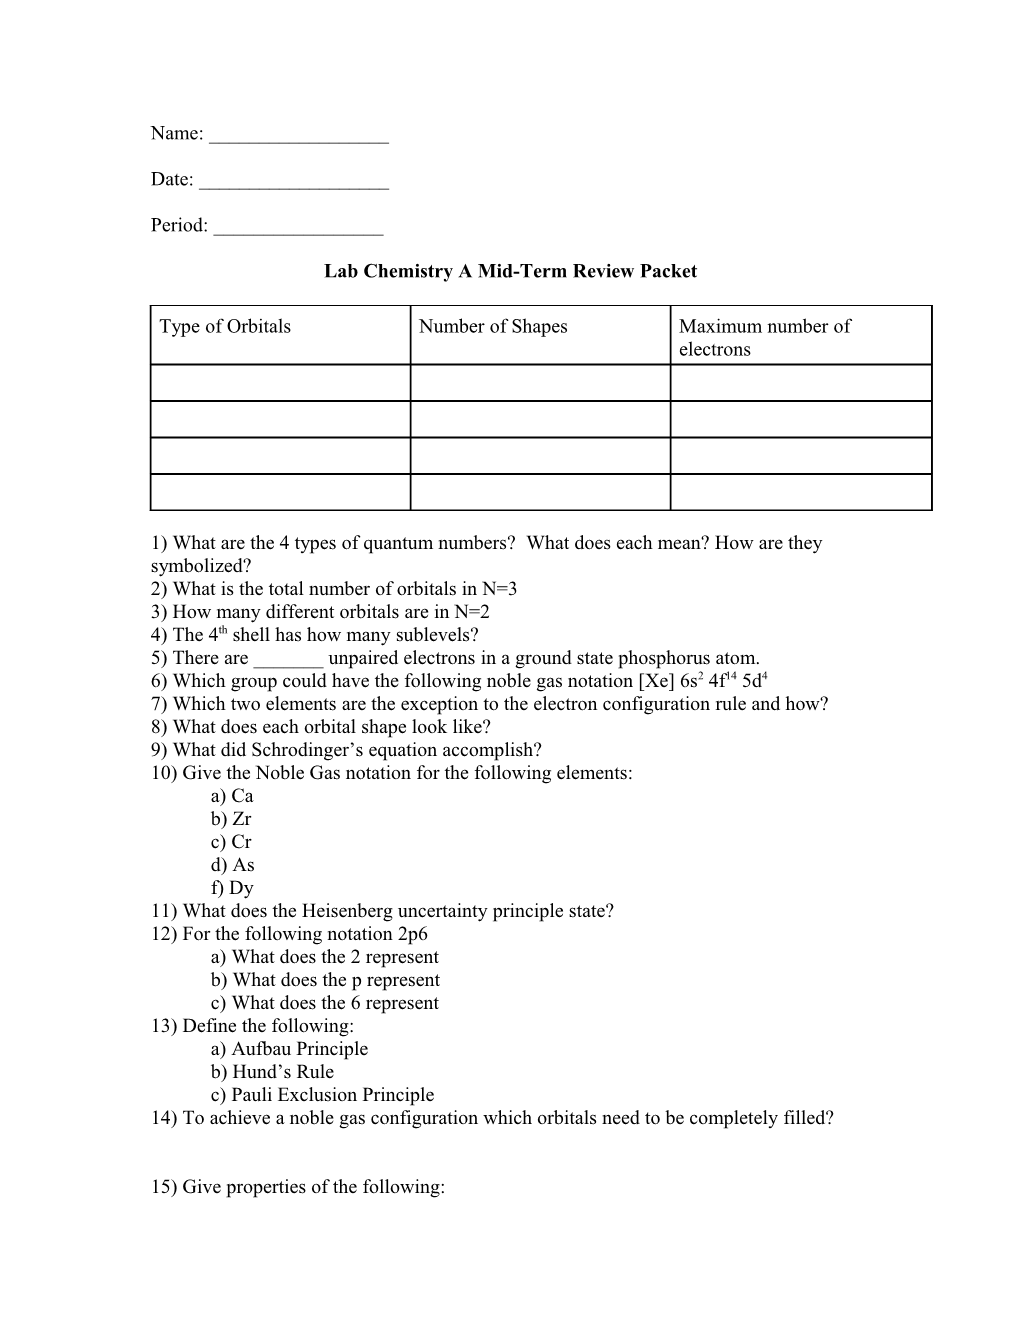 Lab Chemistry a Mid-Term Review Packet